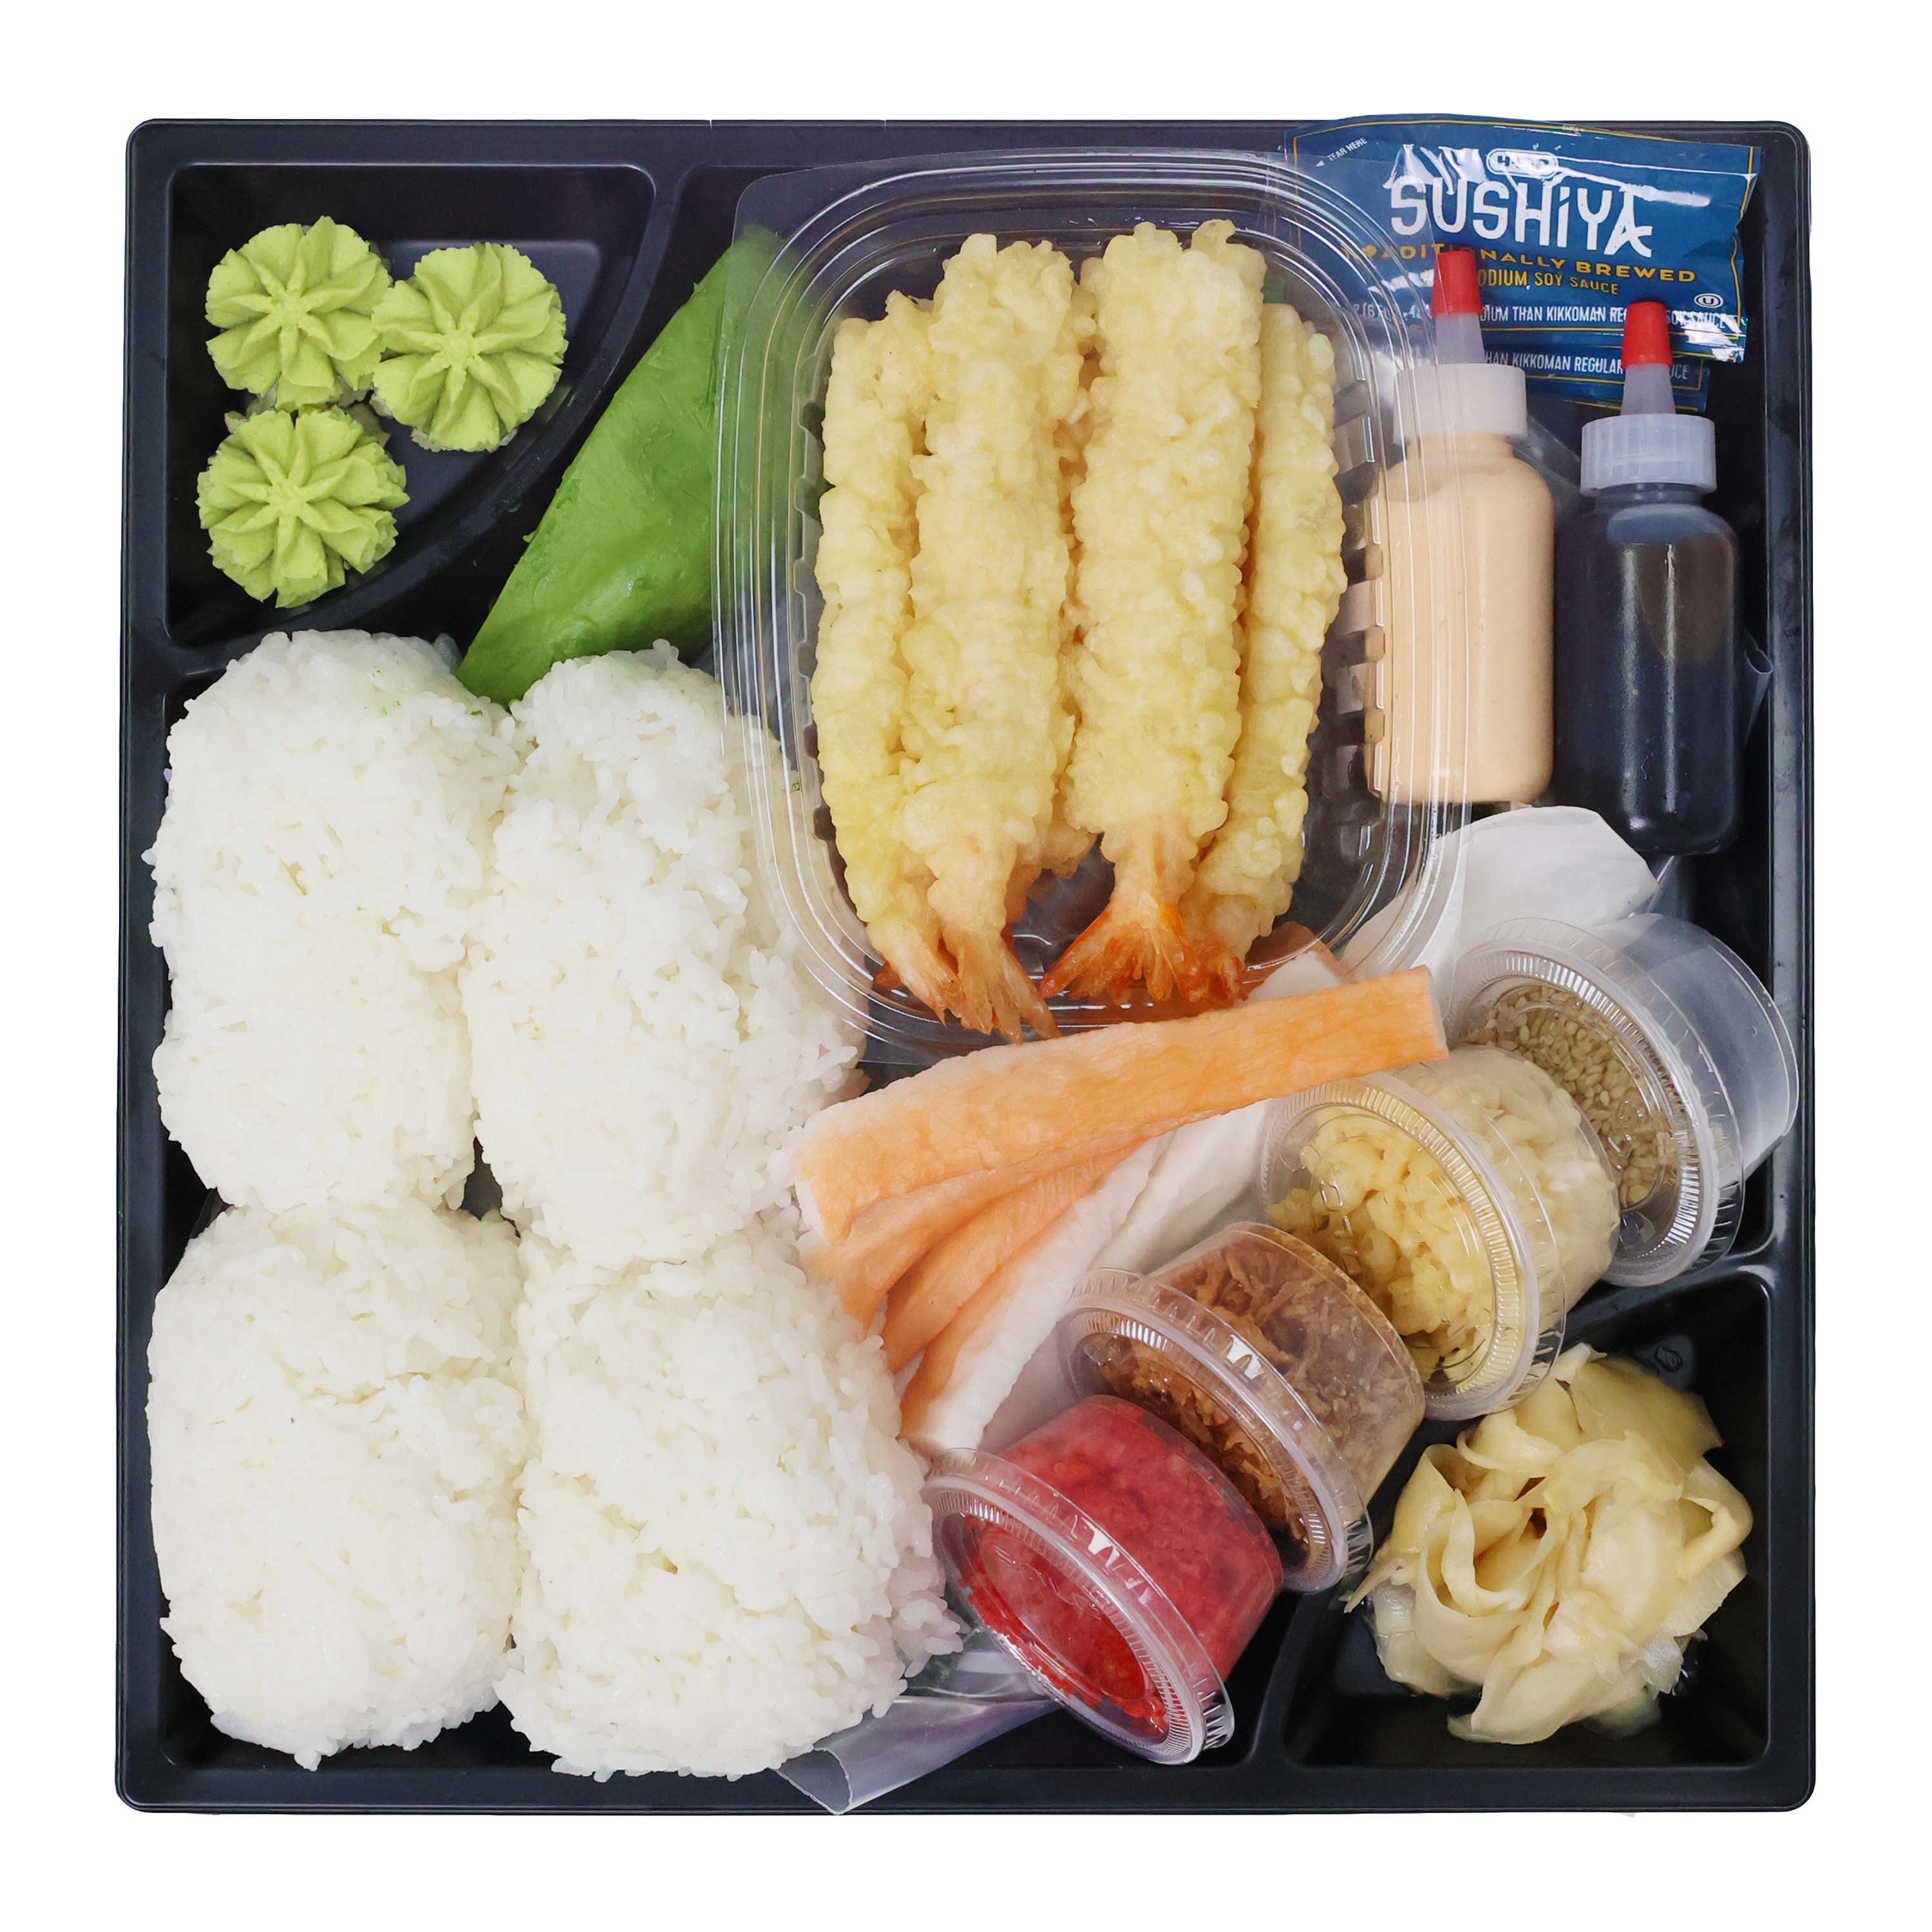 Japanese DIY Sushi Maker Kit Of Brown Rice Sushi And Roll Cooking